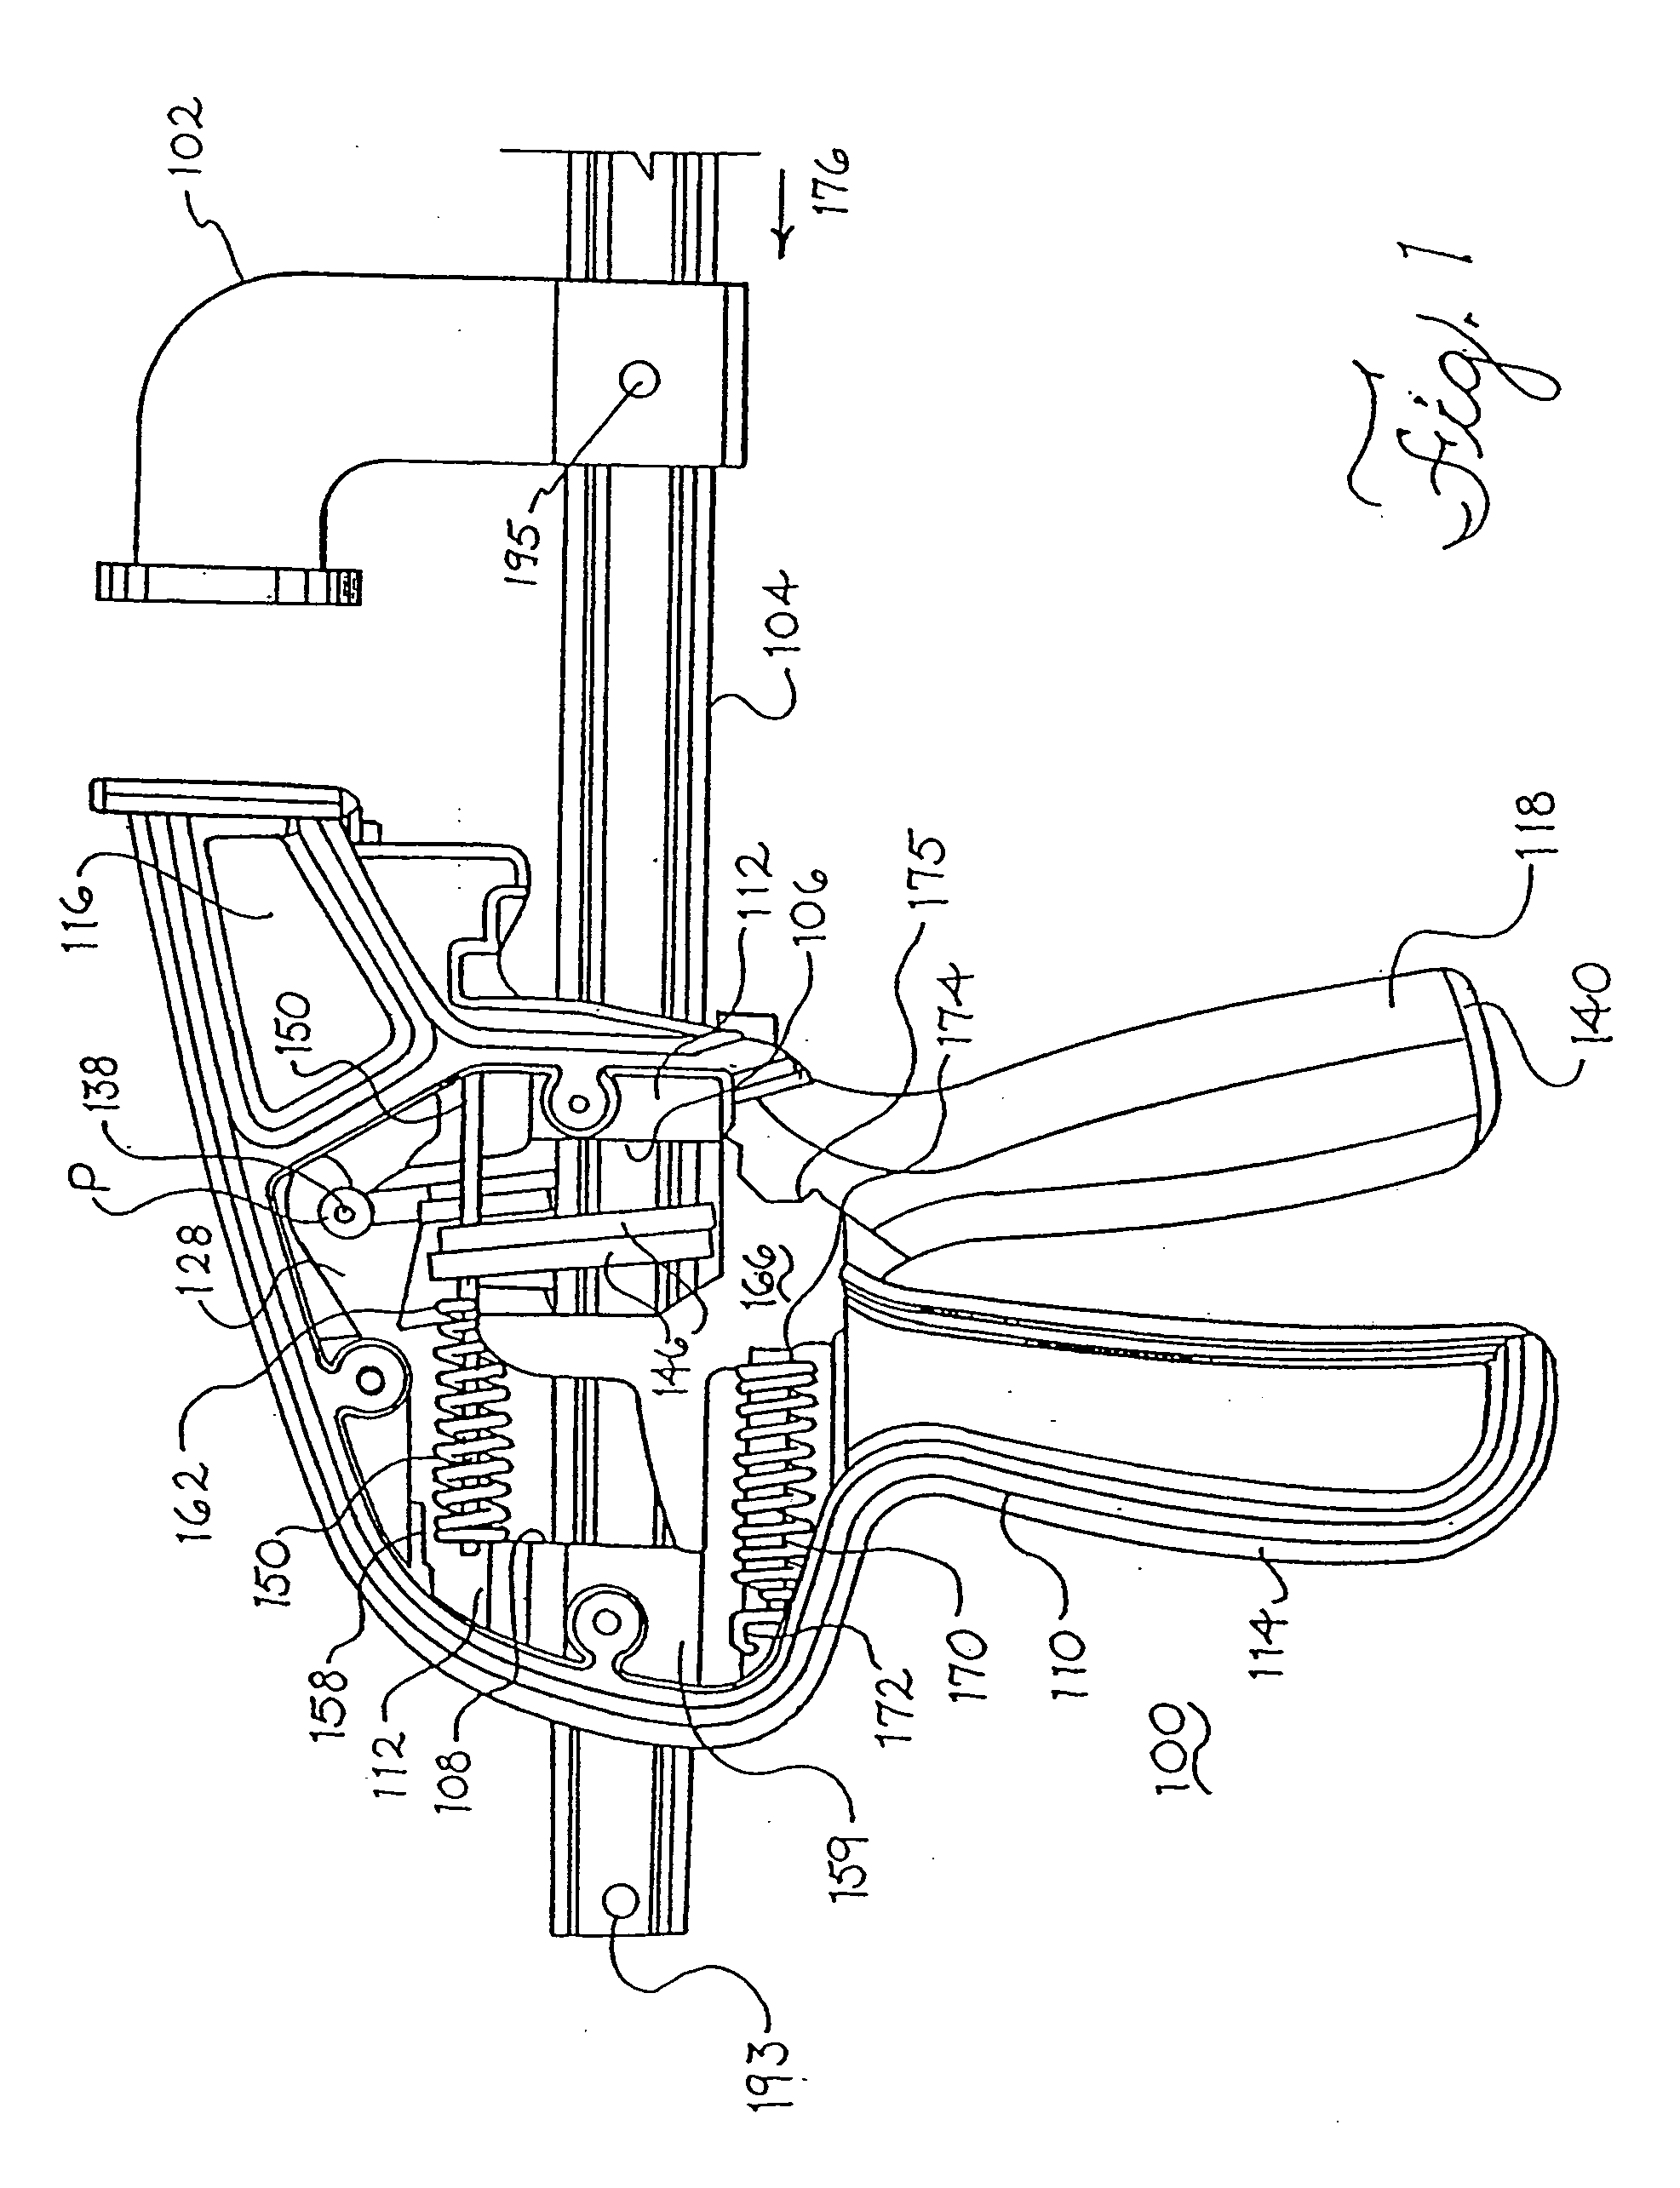 Increased and variable force and multi-speed clamps